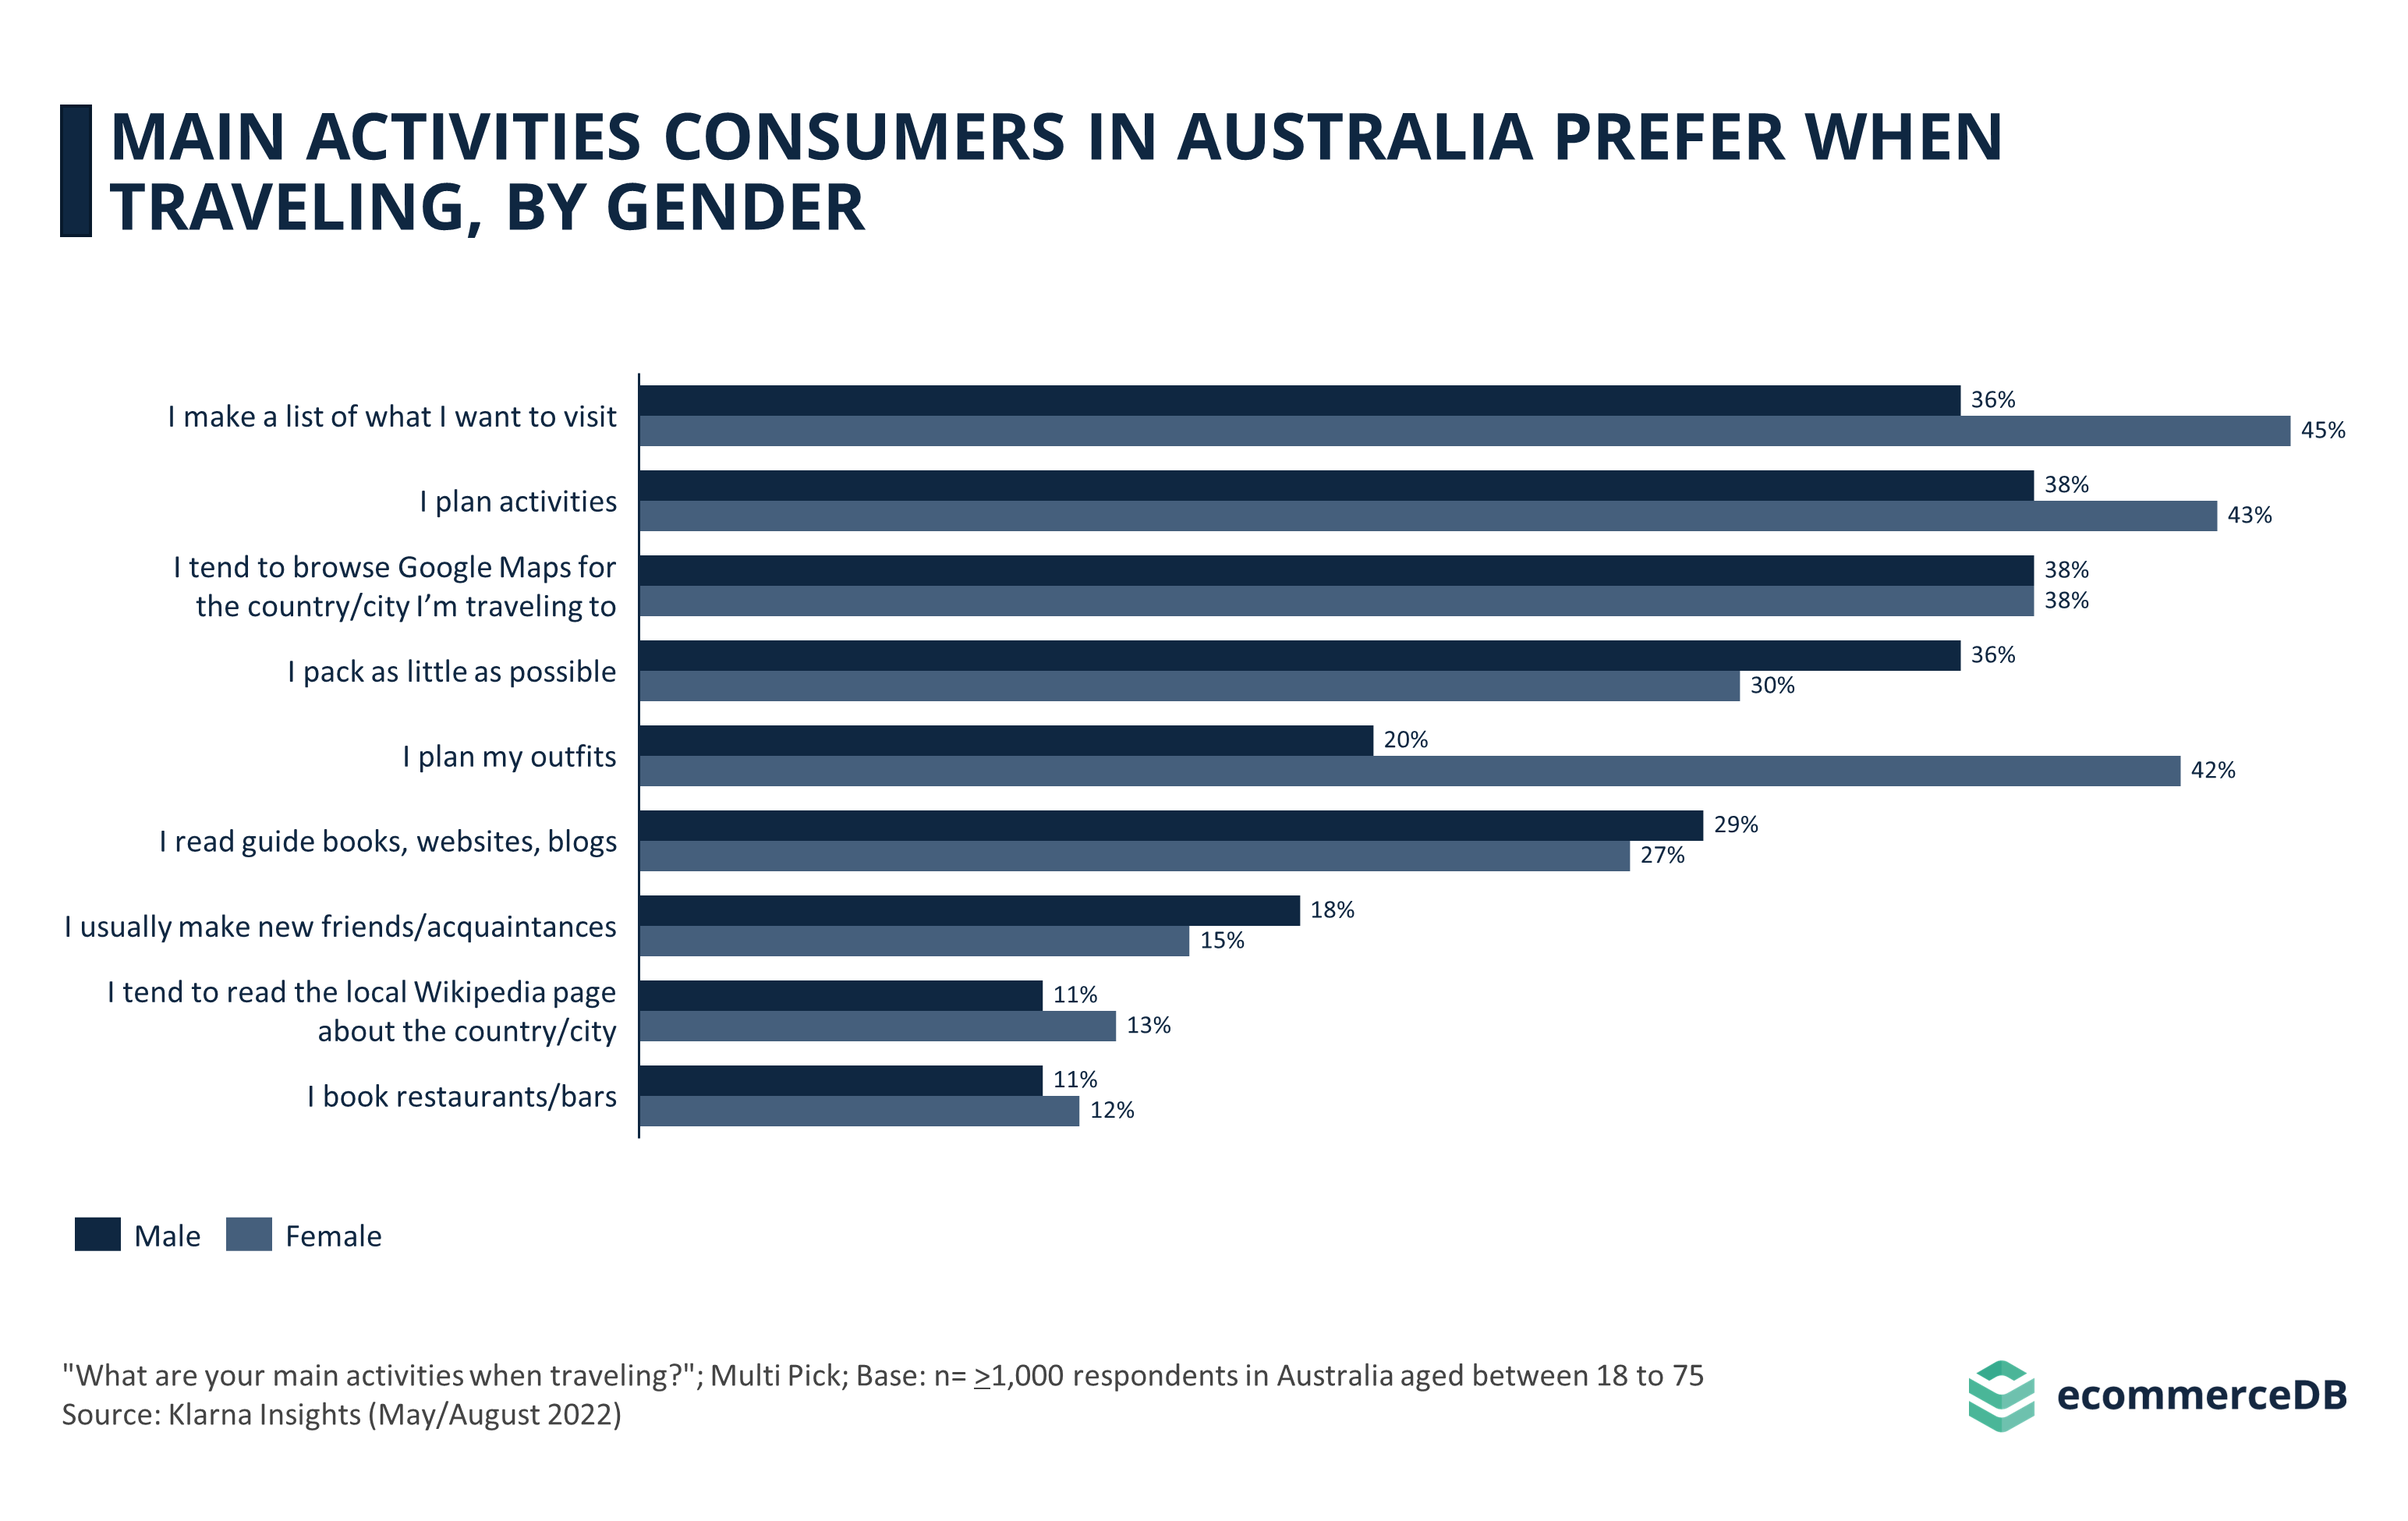 Main Activities Consumers in Australia Prefer When Traveling, by Gender